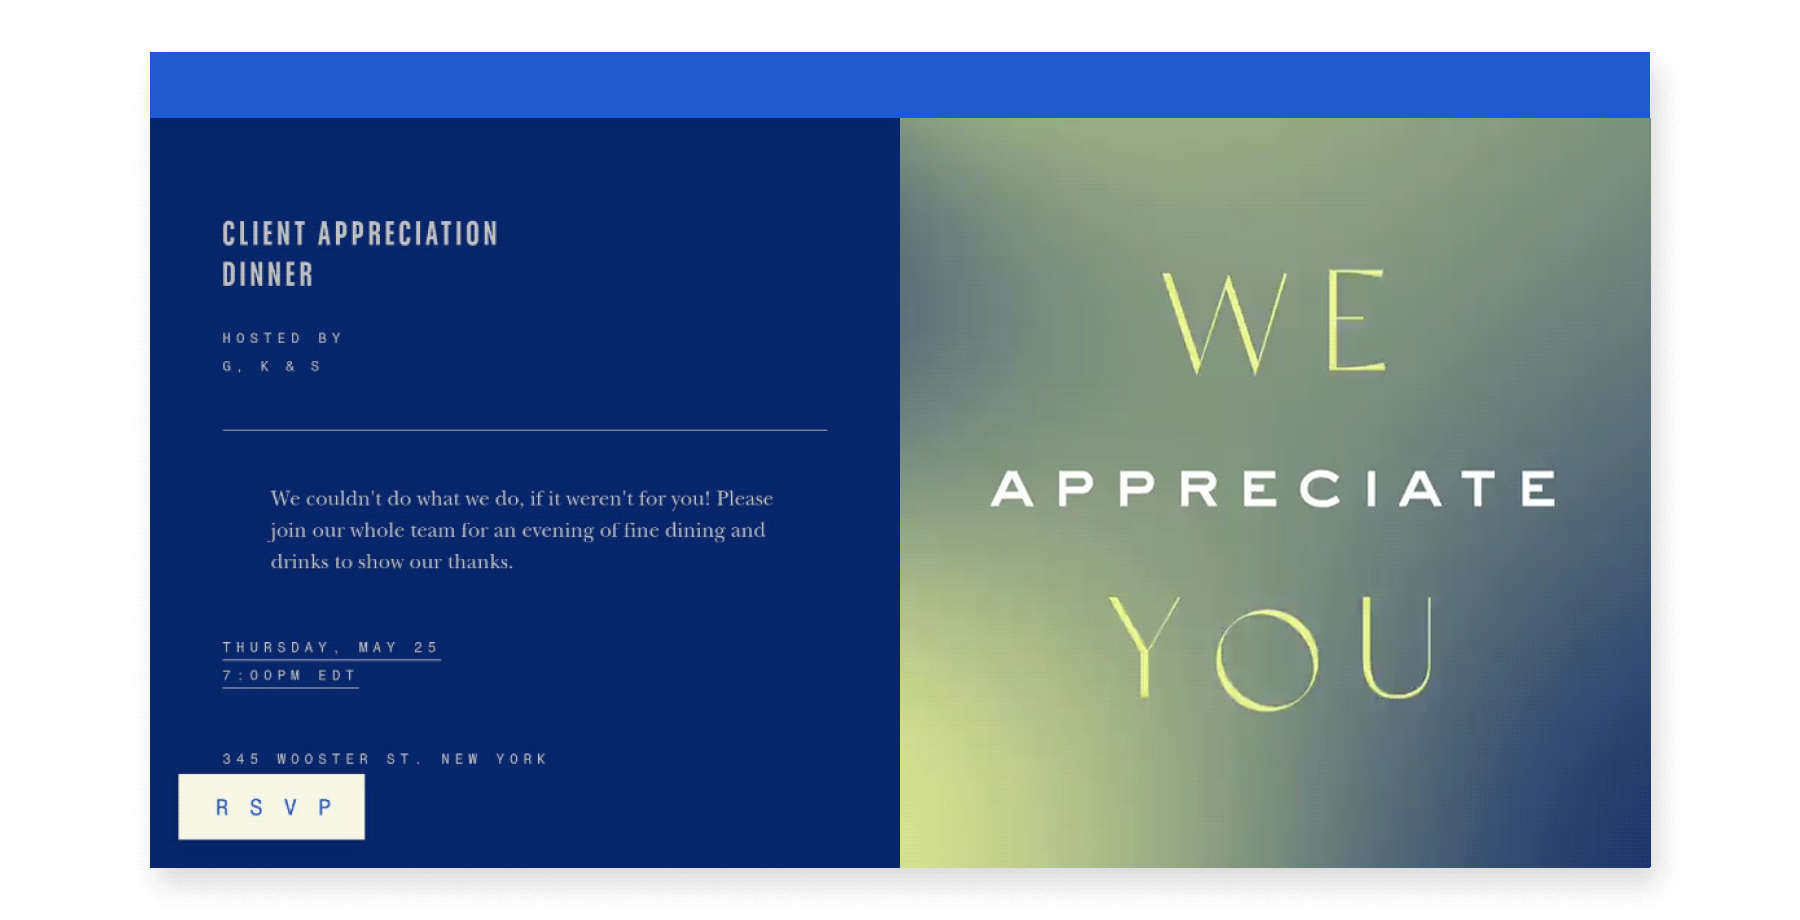 A client appreciation dinner online invite with blue on the left and on the right, a cloudy green gif with the words “We appreciate you” appearing and disappearing.